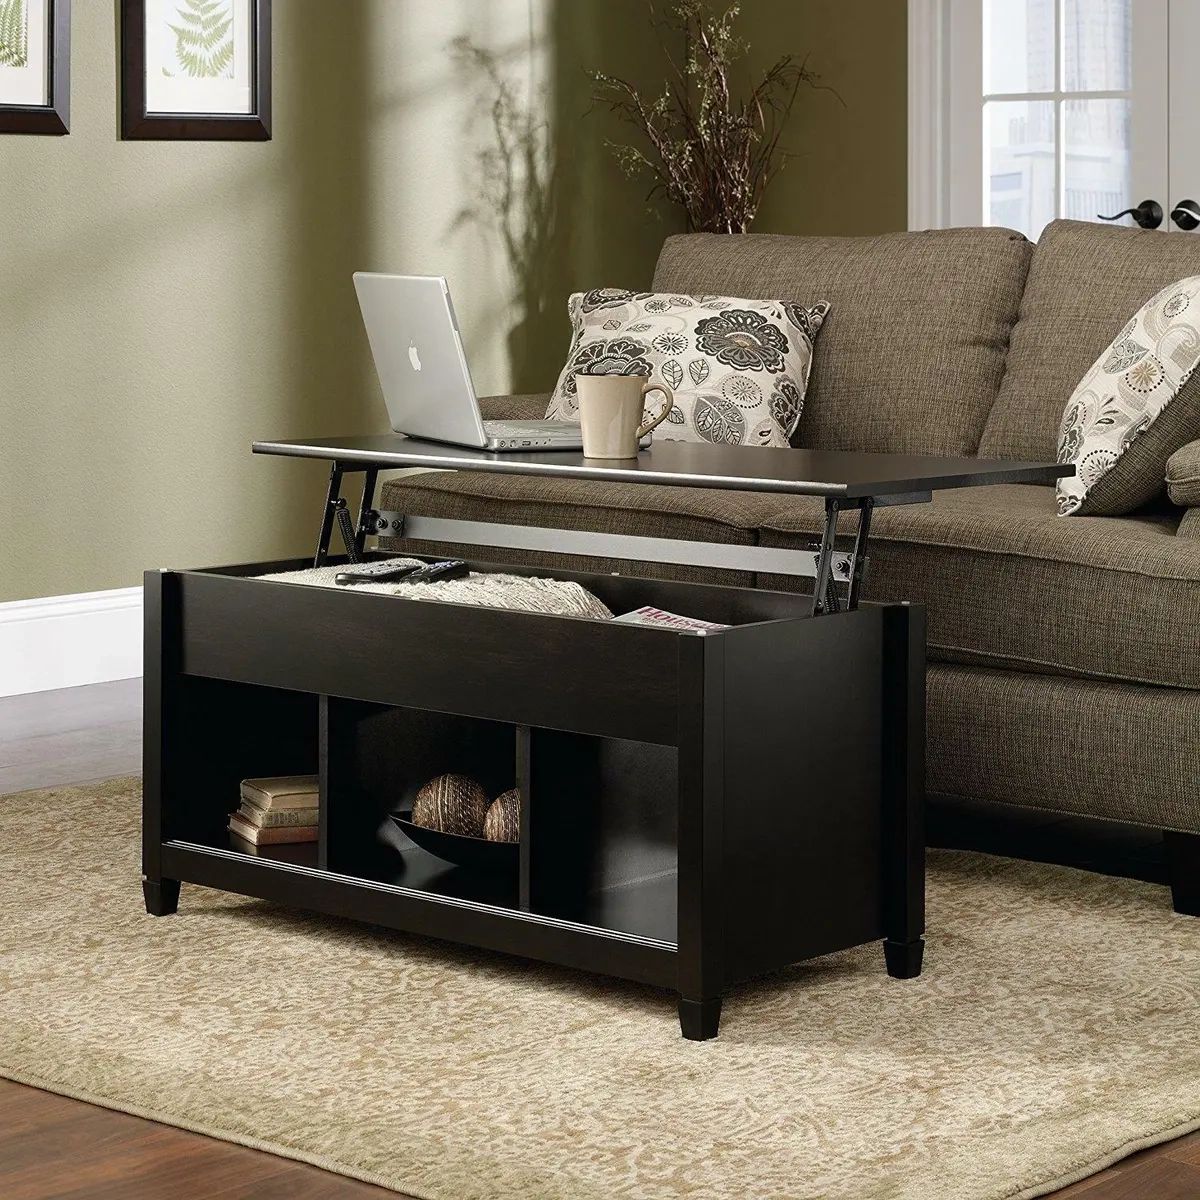 Lift Top Coffee Table Modern Furniture W/Hidden Storage Compartment & Shelf  | Ebay With Modern Wooden Lift Top Tables (View 8 of 15)